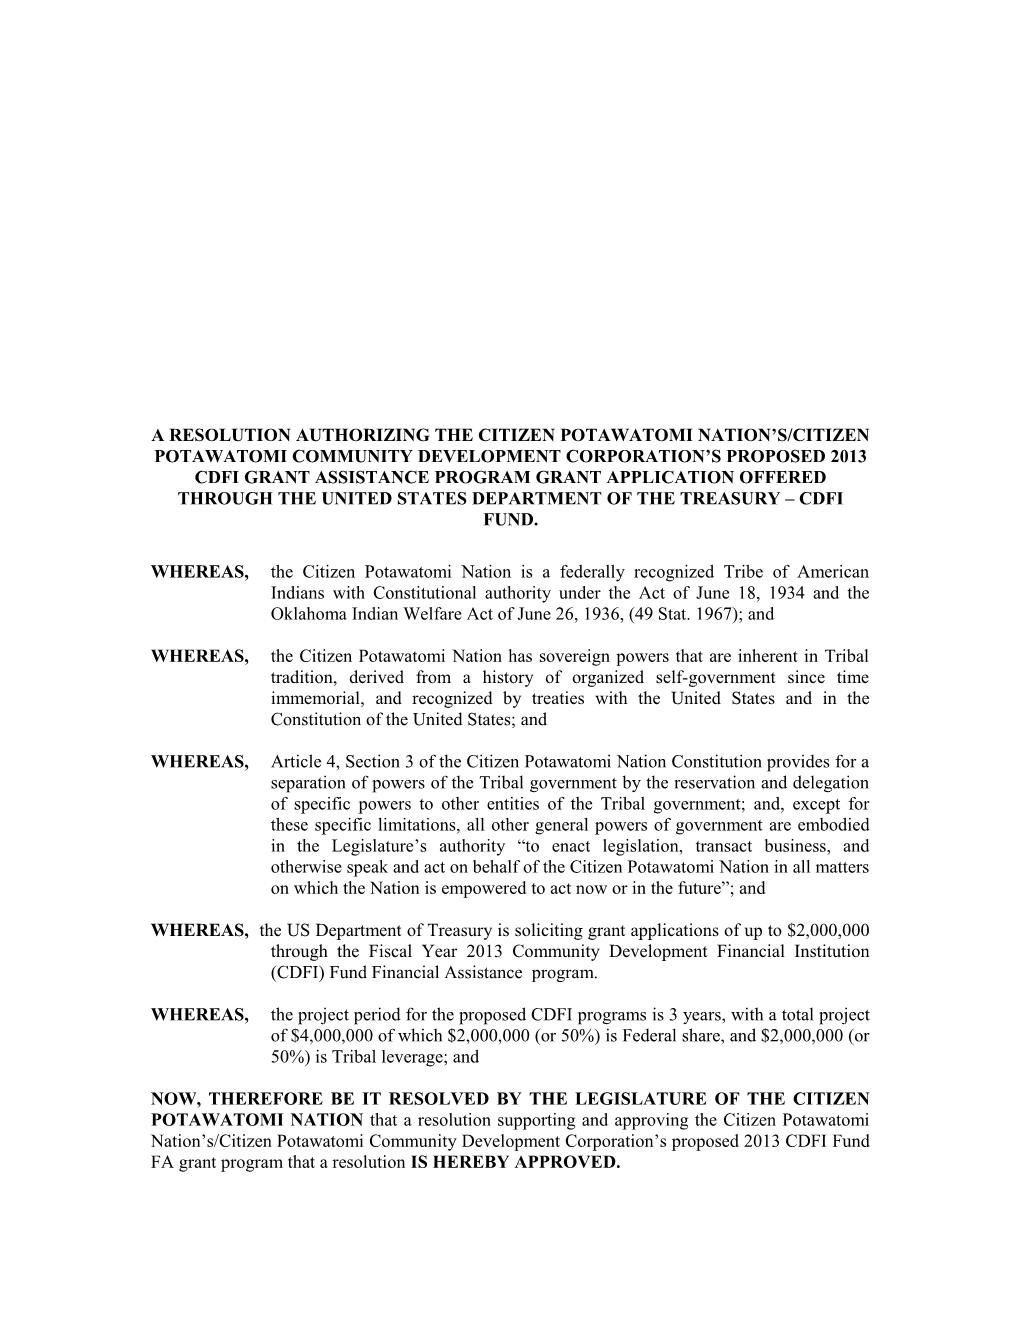 A Resolution Authorizing the Citizen Potawatomi Nation S/Citizen Potawatomi Community